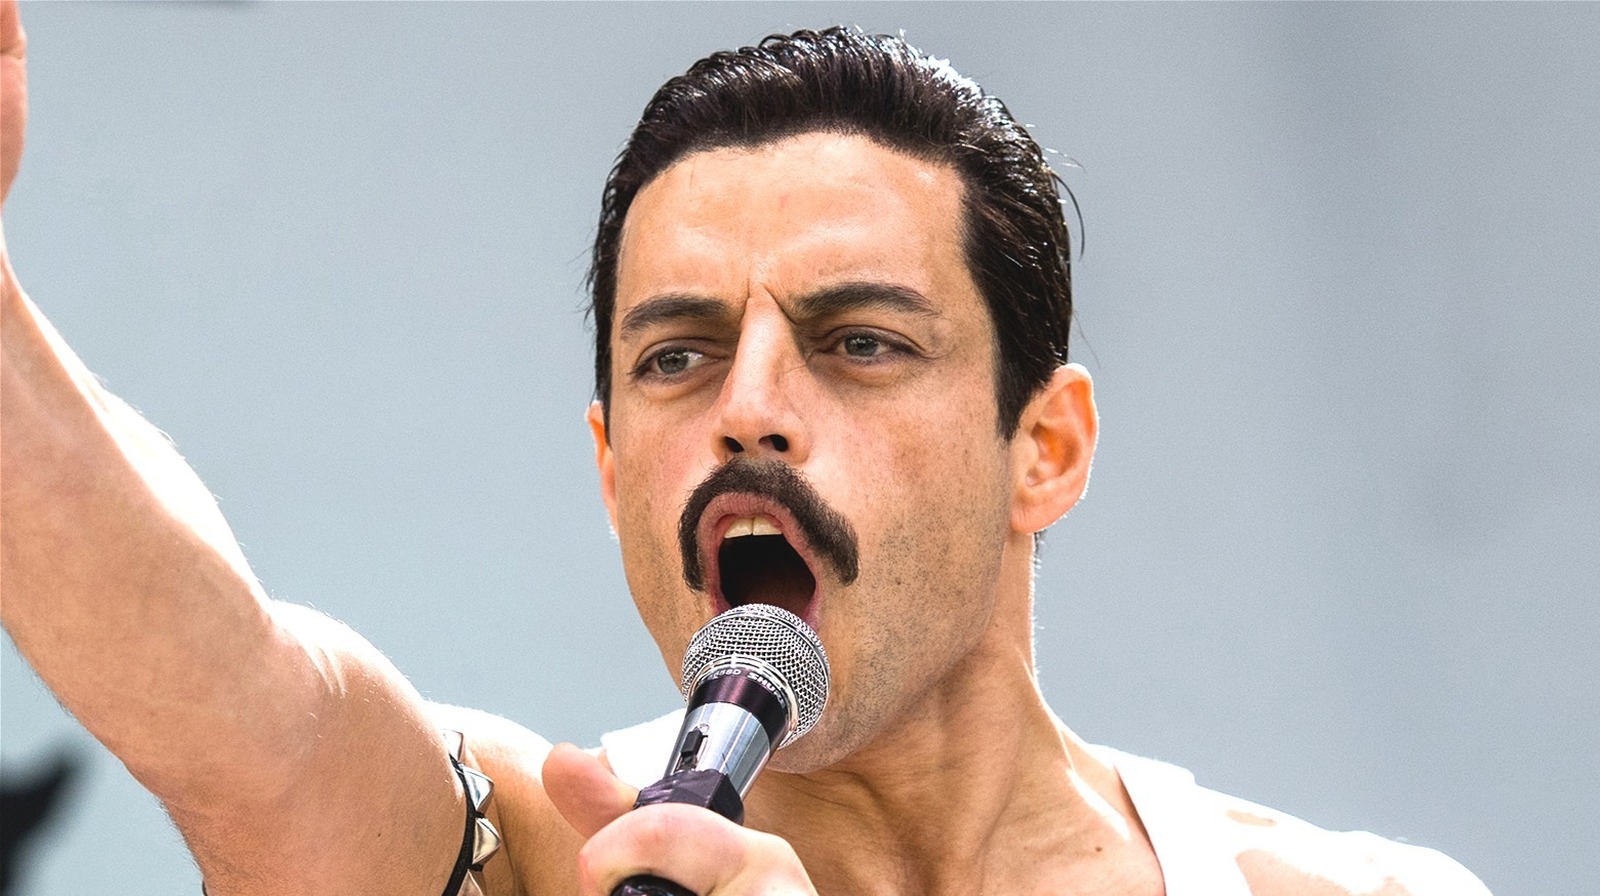 Bohemian Rhapsody — Movie Review. Even though I have some strong…, by  Alper Memioglu